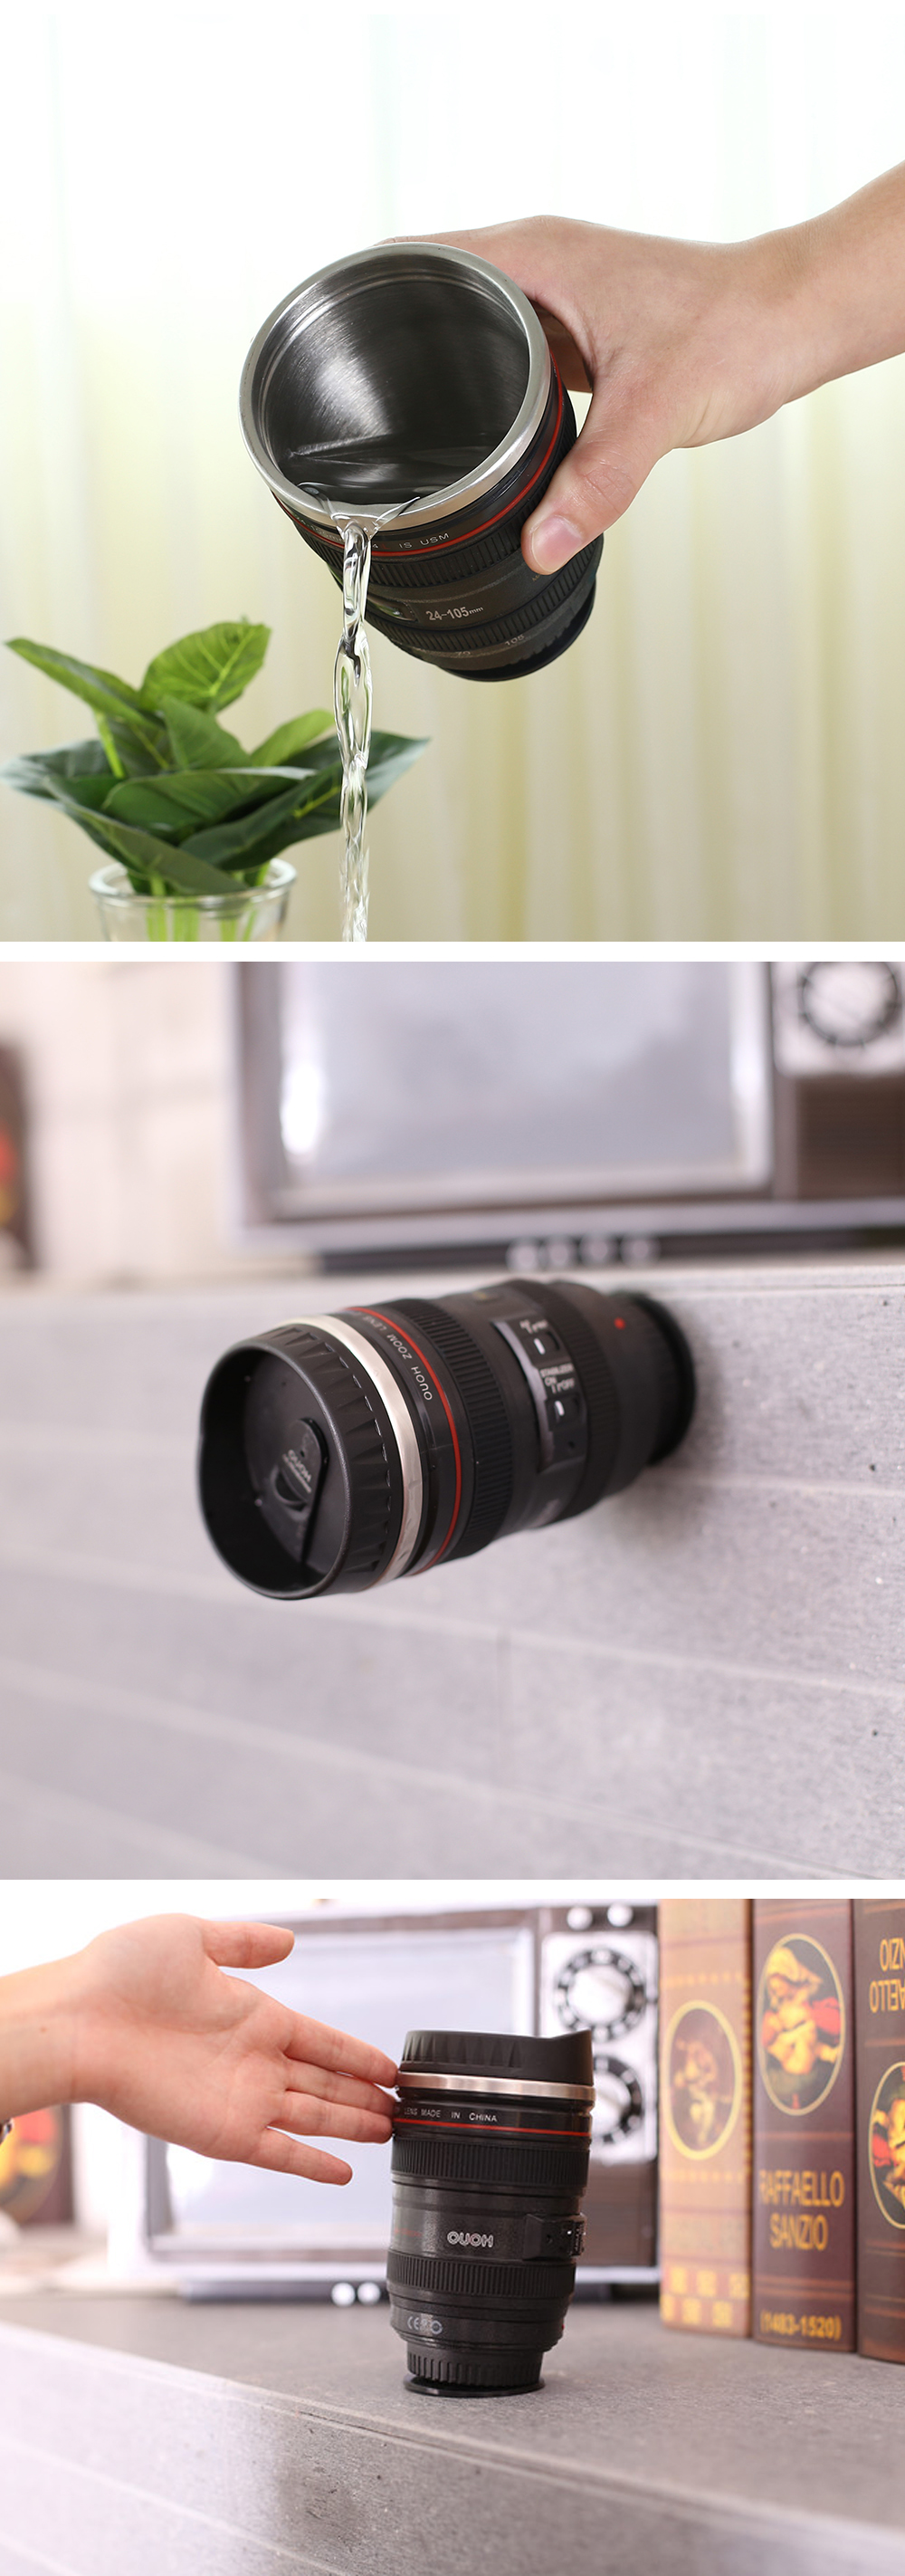 400ML-Camera-Lens-Coffee-Mug-Stainless-Steel-Water-Cup-Photographer-Gift-Coffee-Cup-with-Sucker-for--1748664-2